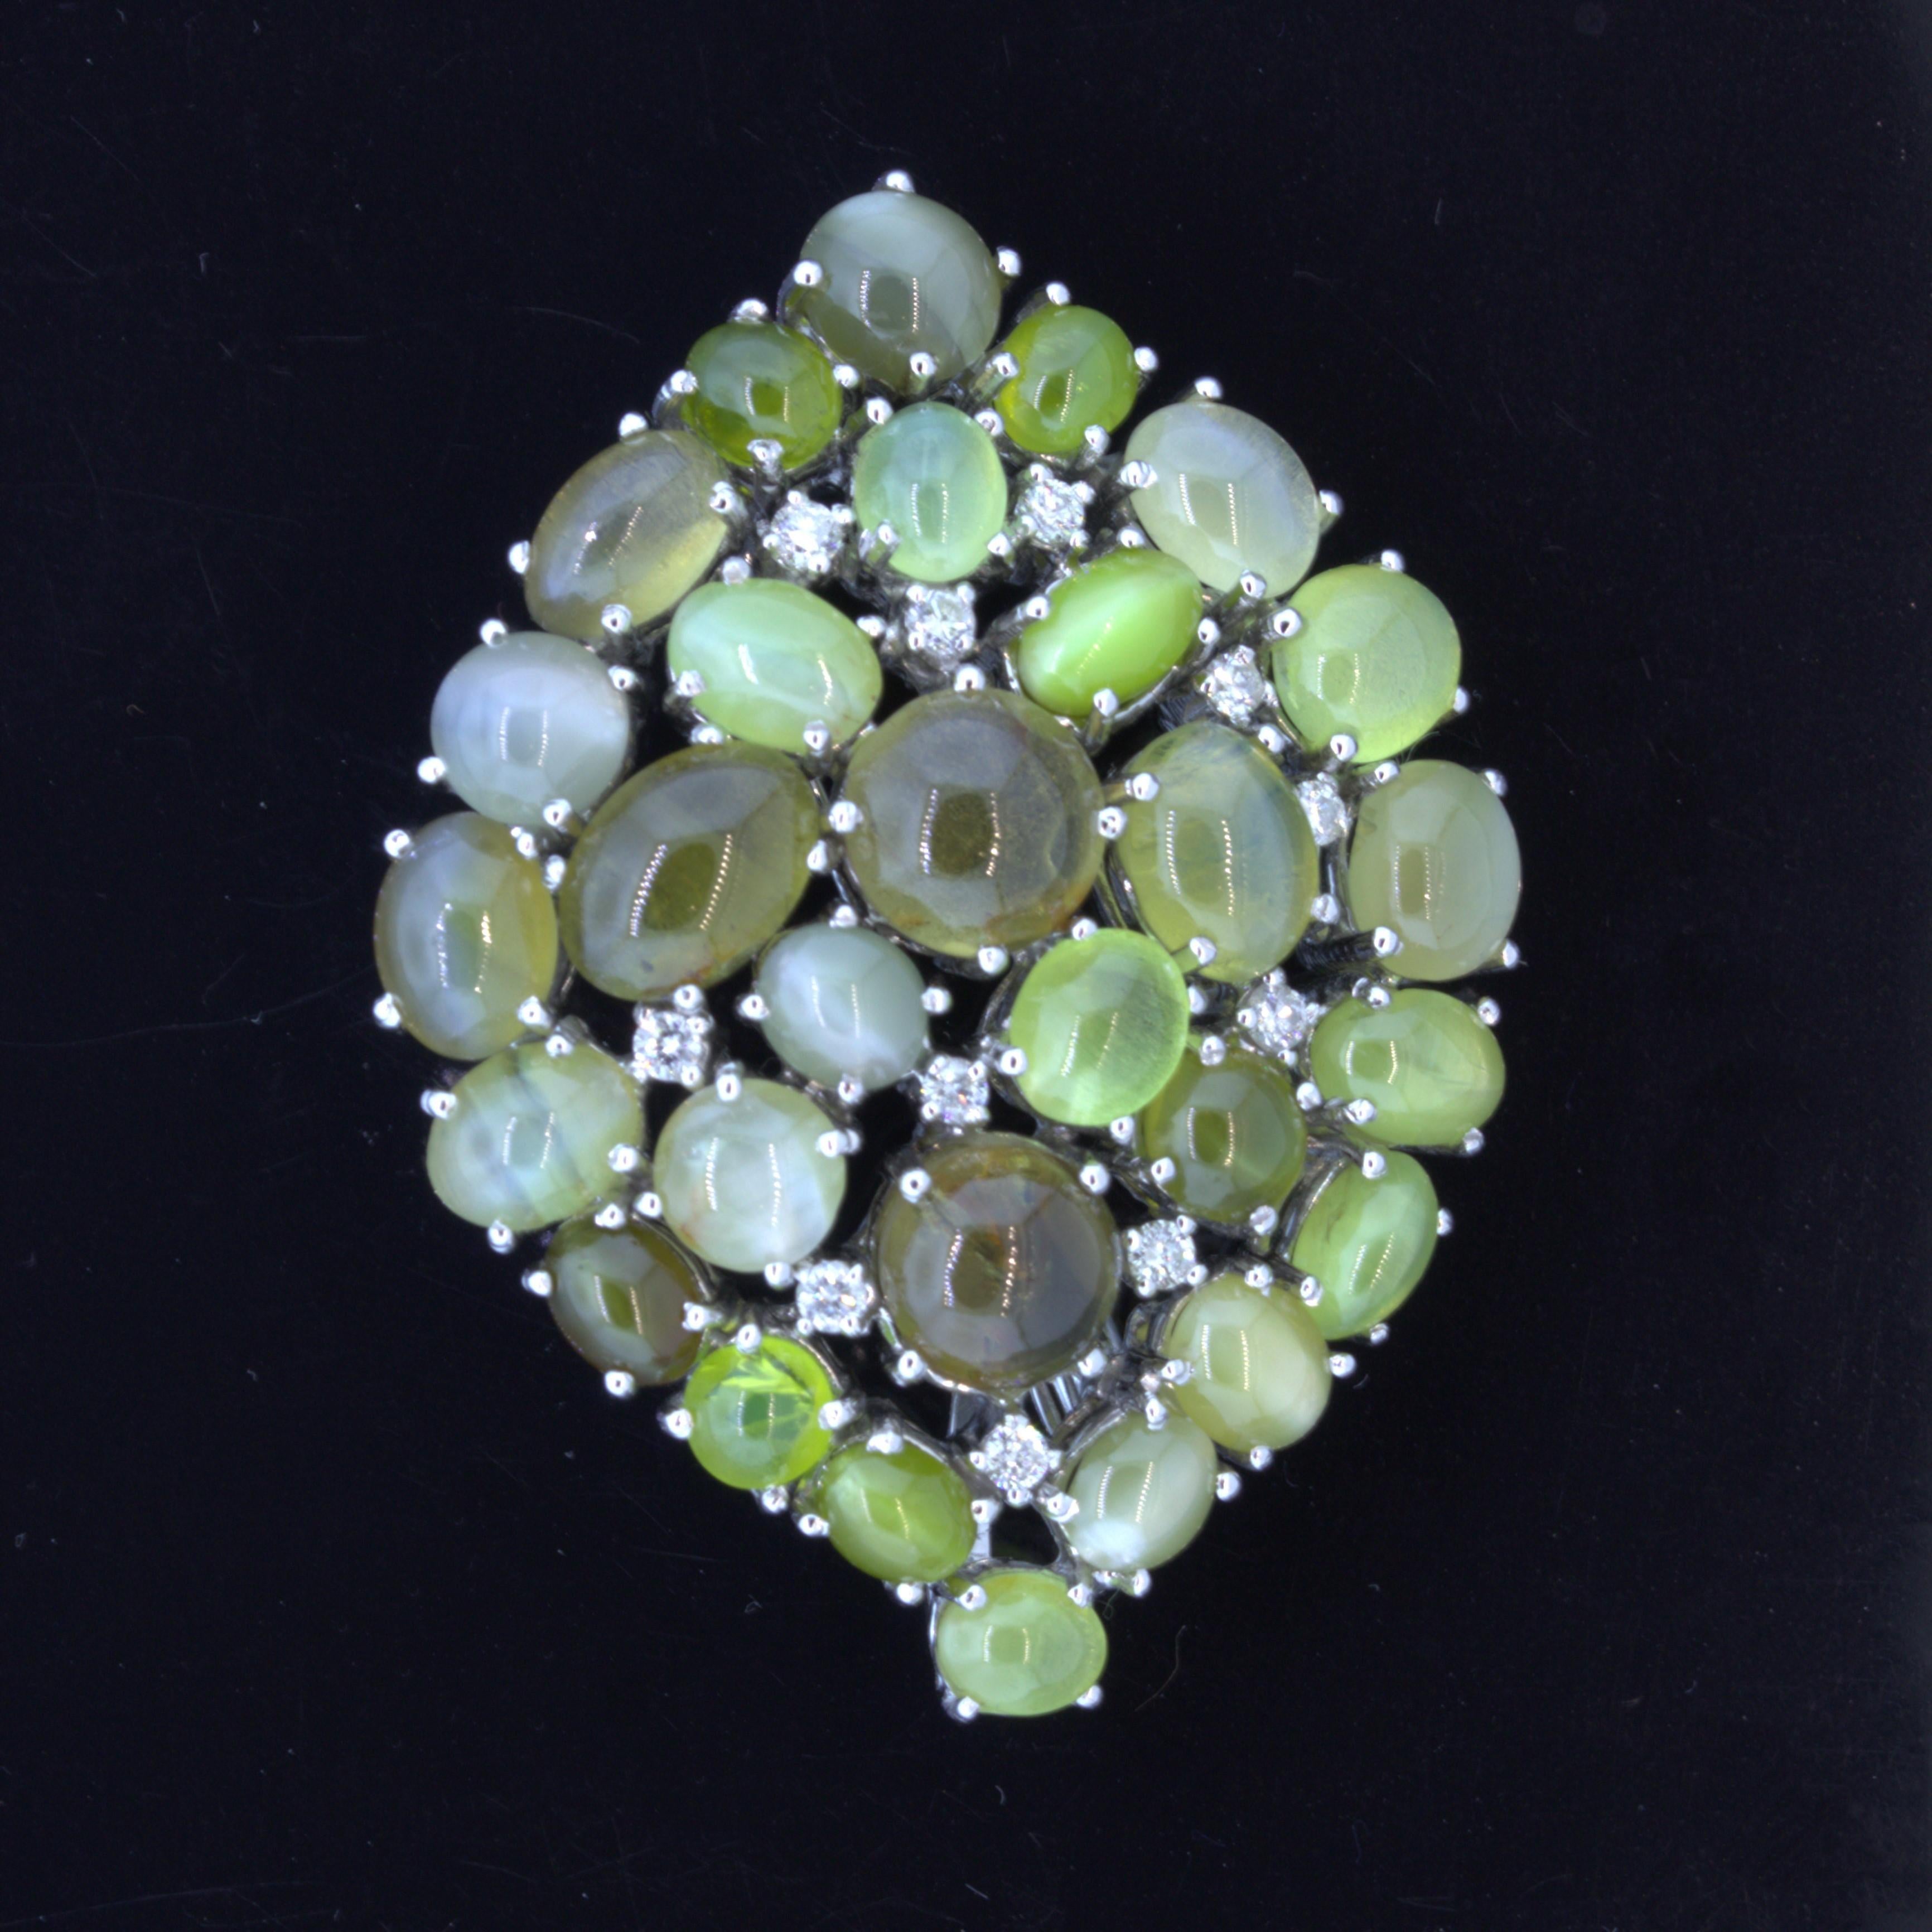 A fun and sleek brooch featuring 29 cats eye chrysoberyl weighing a total of 33.78 carats. Each stone has wonderful chatoyancy, cats eye effect, making it appear as if 29 eyes are looking at you from different directions! The brooch is complemented